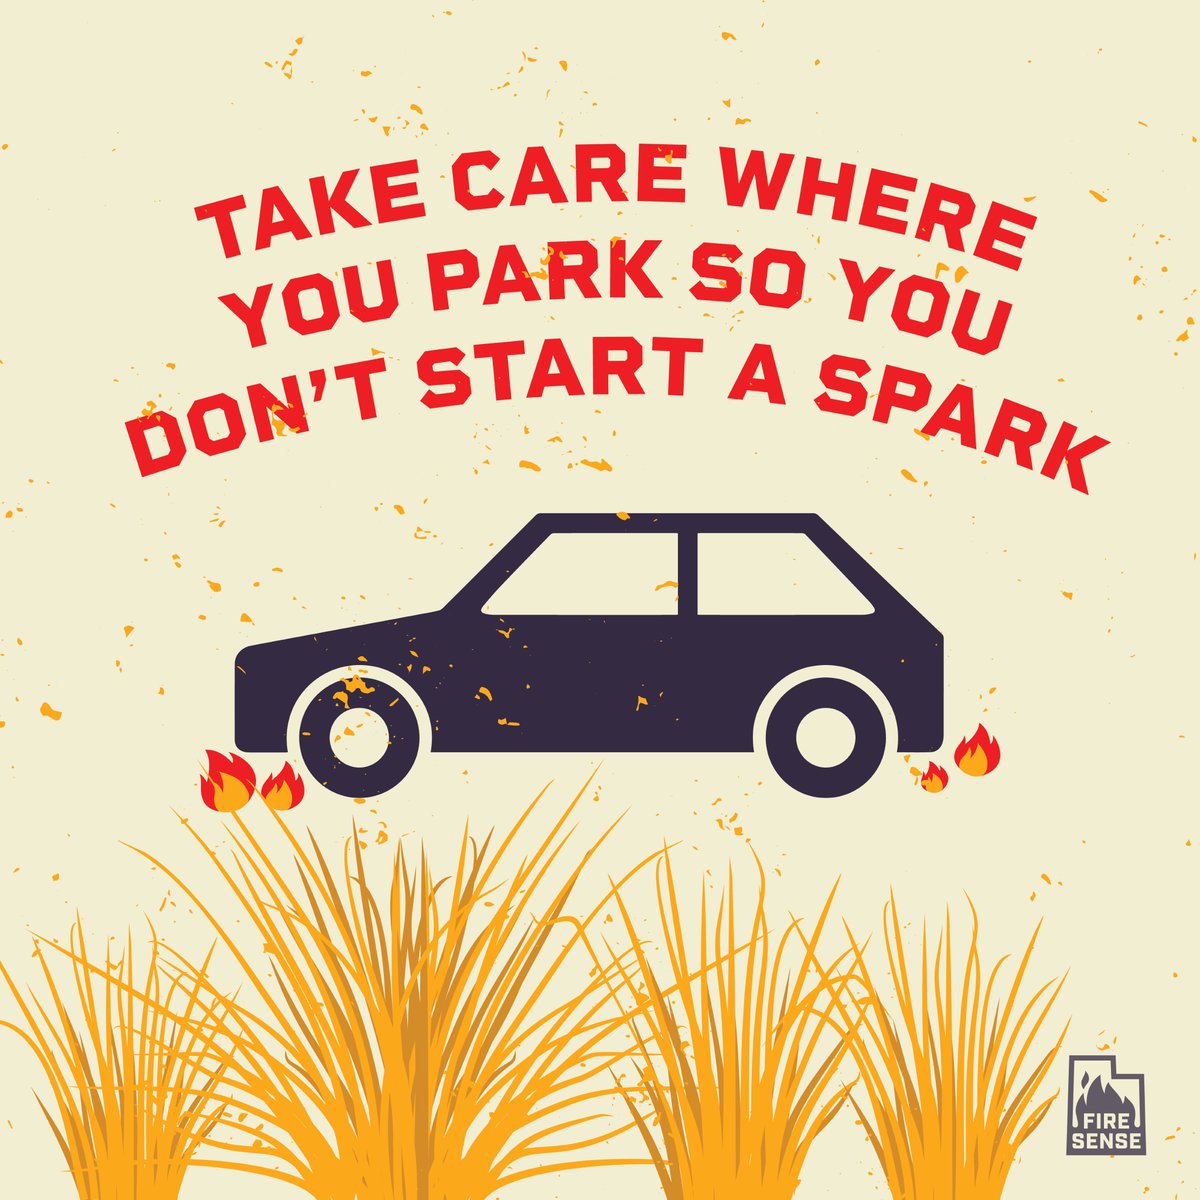 Be aware! Parking your vehicle on dry vegetation can cause a wildfire. Do not park on dry grass! Use your #FireSense and be mindful when you park.